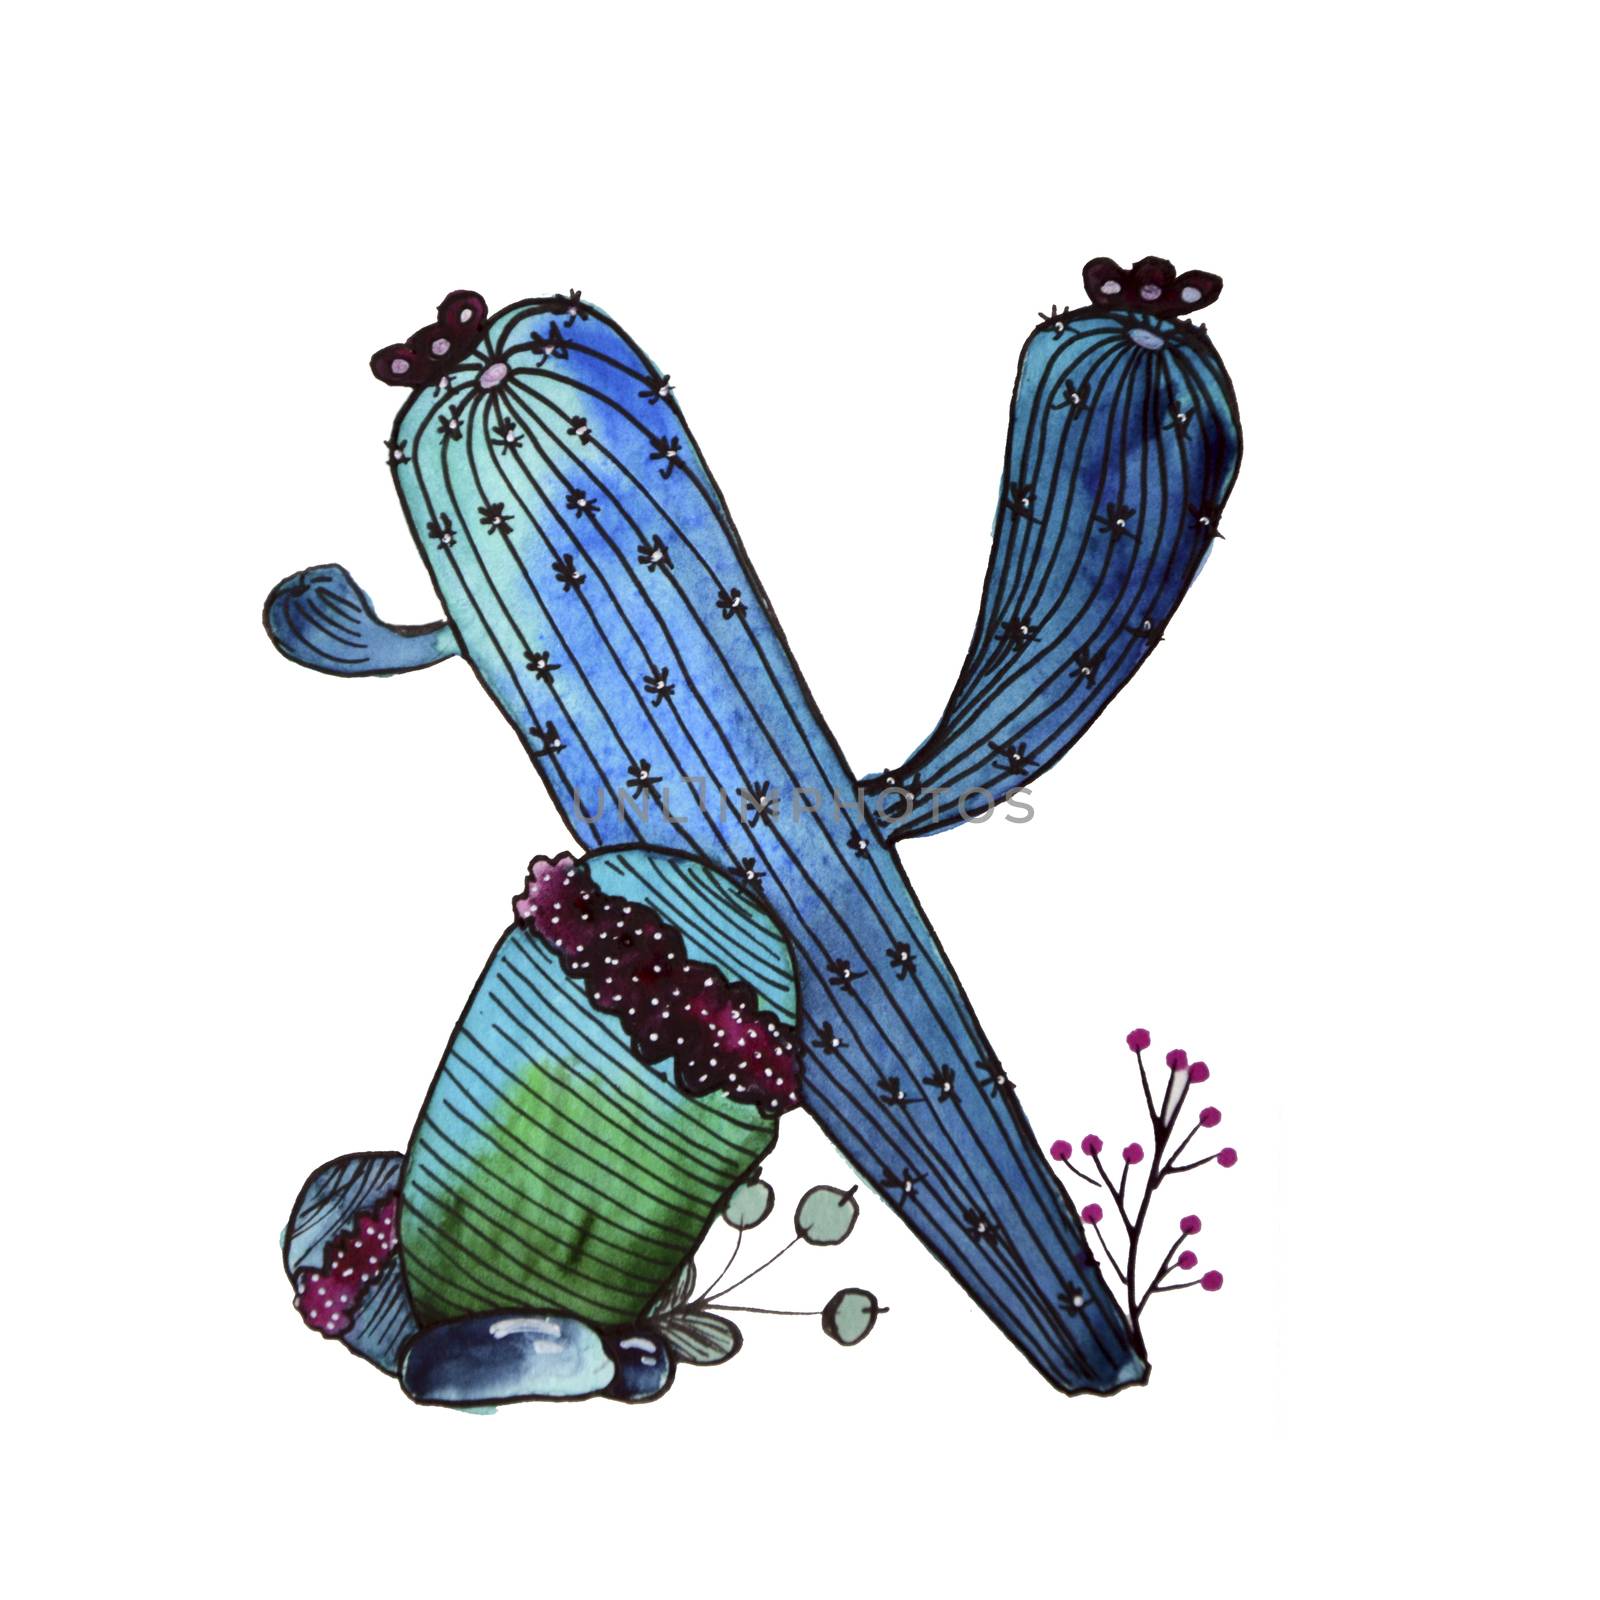 X letter in the form of cactus in blue colors, green eco English letter Illustration on a white background by kimbo-bo